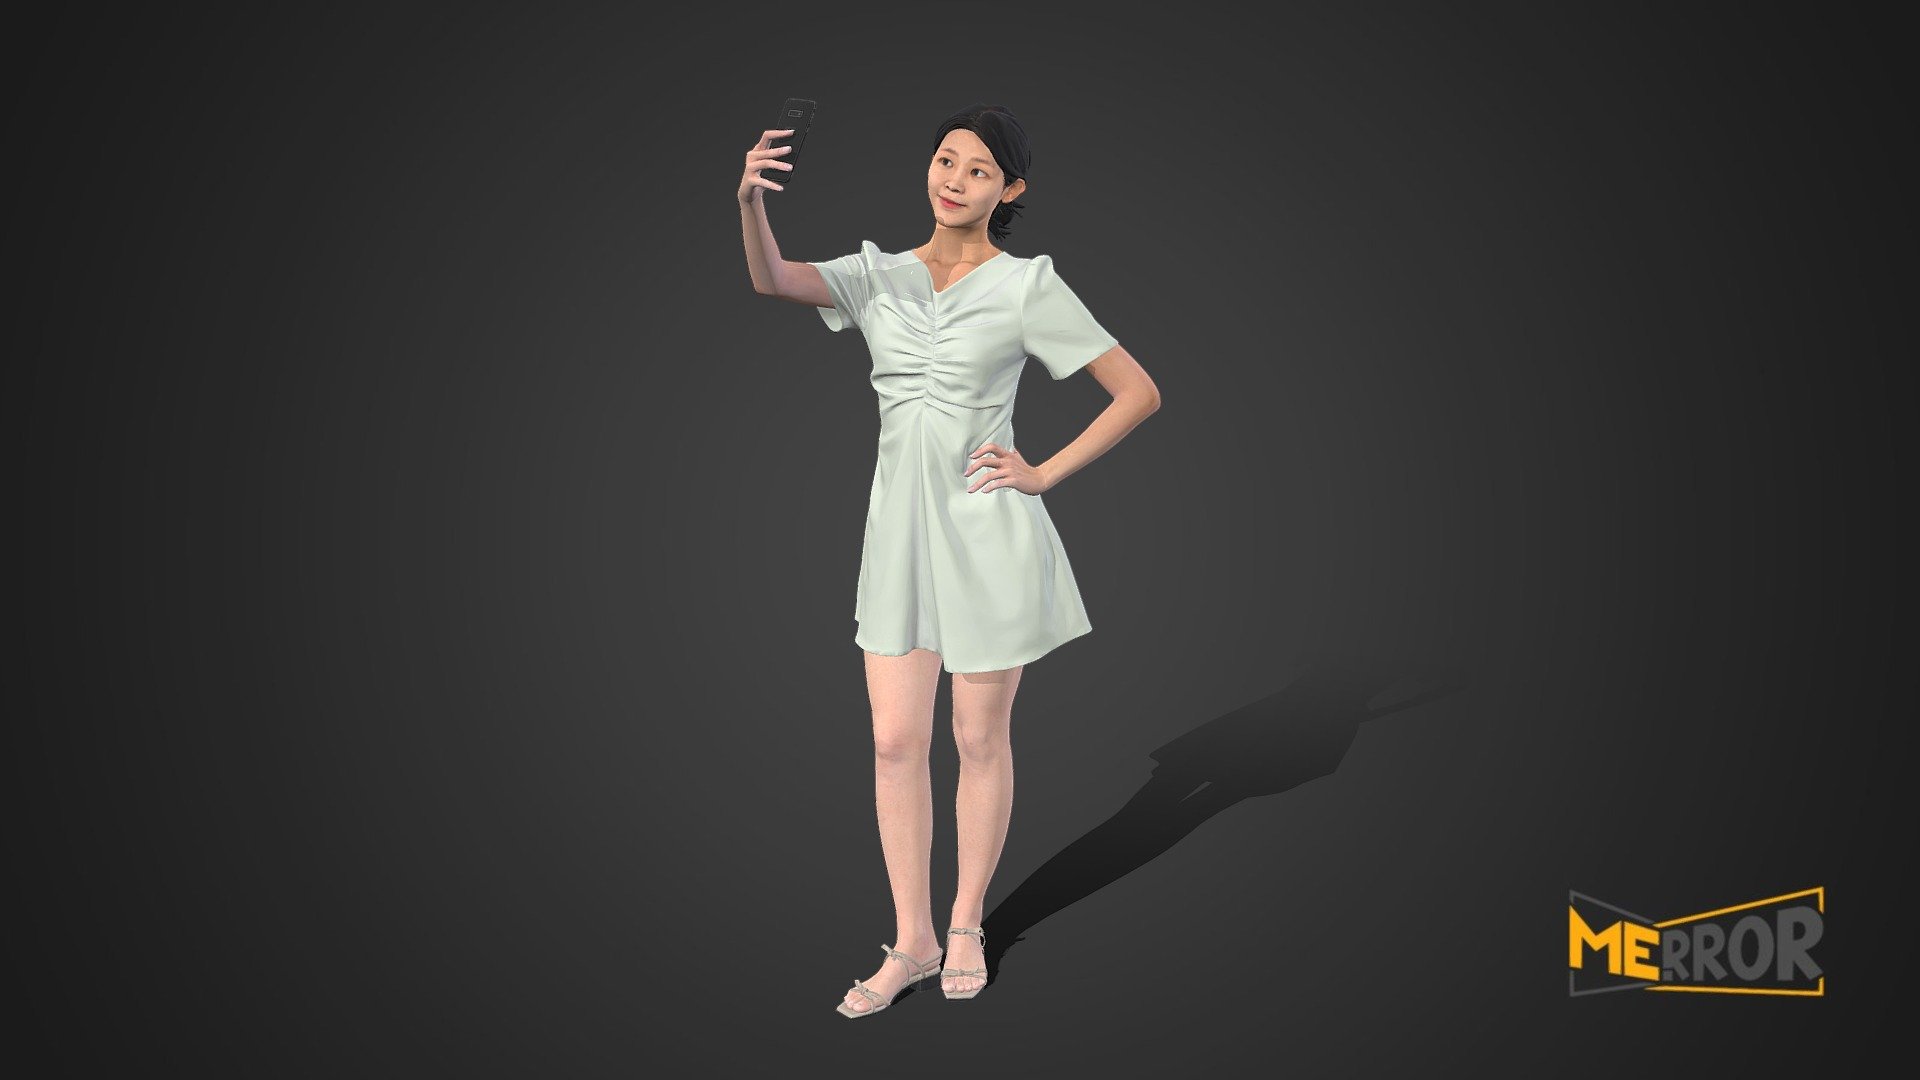 ME.RROR


From 3D models of Asian individuals to a fresh selection of free assets available each month - explore a richer diversity of photorealistic 3D assets at the ME.RROR asset store!

https://me-rror.com/store




[Model Info]




Model Formats : FBX, MAX


Texture Maps (8K) : Diffuse




Find Scanned - TPO version here: https://sketchfab.com/3d-models/asian-woman-scan-posed-24-bf12c73bee8d433786aca0c2be9758c2



If you encounter any problems using this model, please feel free to contact us. We'd be glad to help you.



[About ME.RROR]

Step into the future with ME.RROR, South Korea's leading 3D specialist. Bespoke creations are not just possible; they are our specialty.

Service areas:




3D scanning

3D modeling

Virtual human creation

Inquiries: https://merror.channel.io/lounge - Asian Woman Scan_Posed 62 100K poly - Buy Royalty Free 3D model by ME.RROR Studio (@merror) 3d model